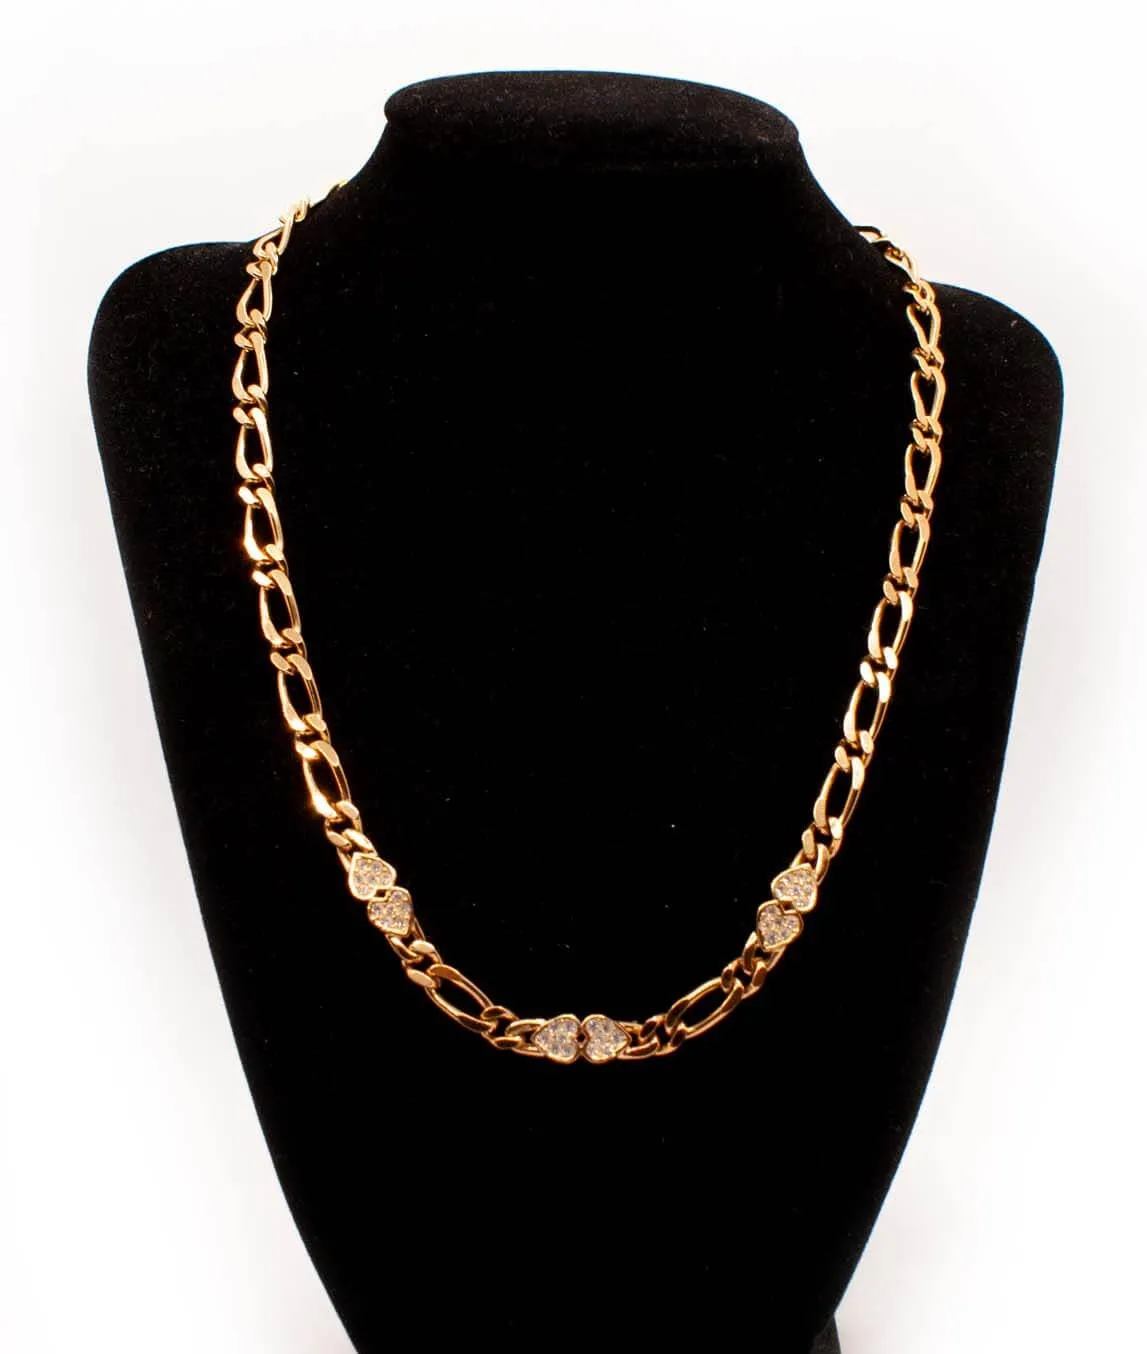 Fancy link gold tone chain necklace by Grosse with crystal hearts on black display bust